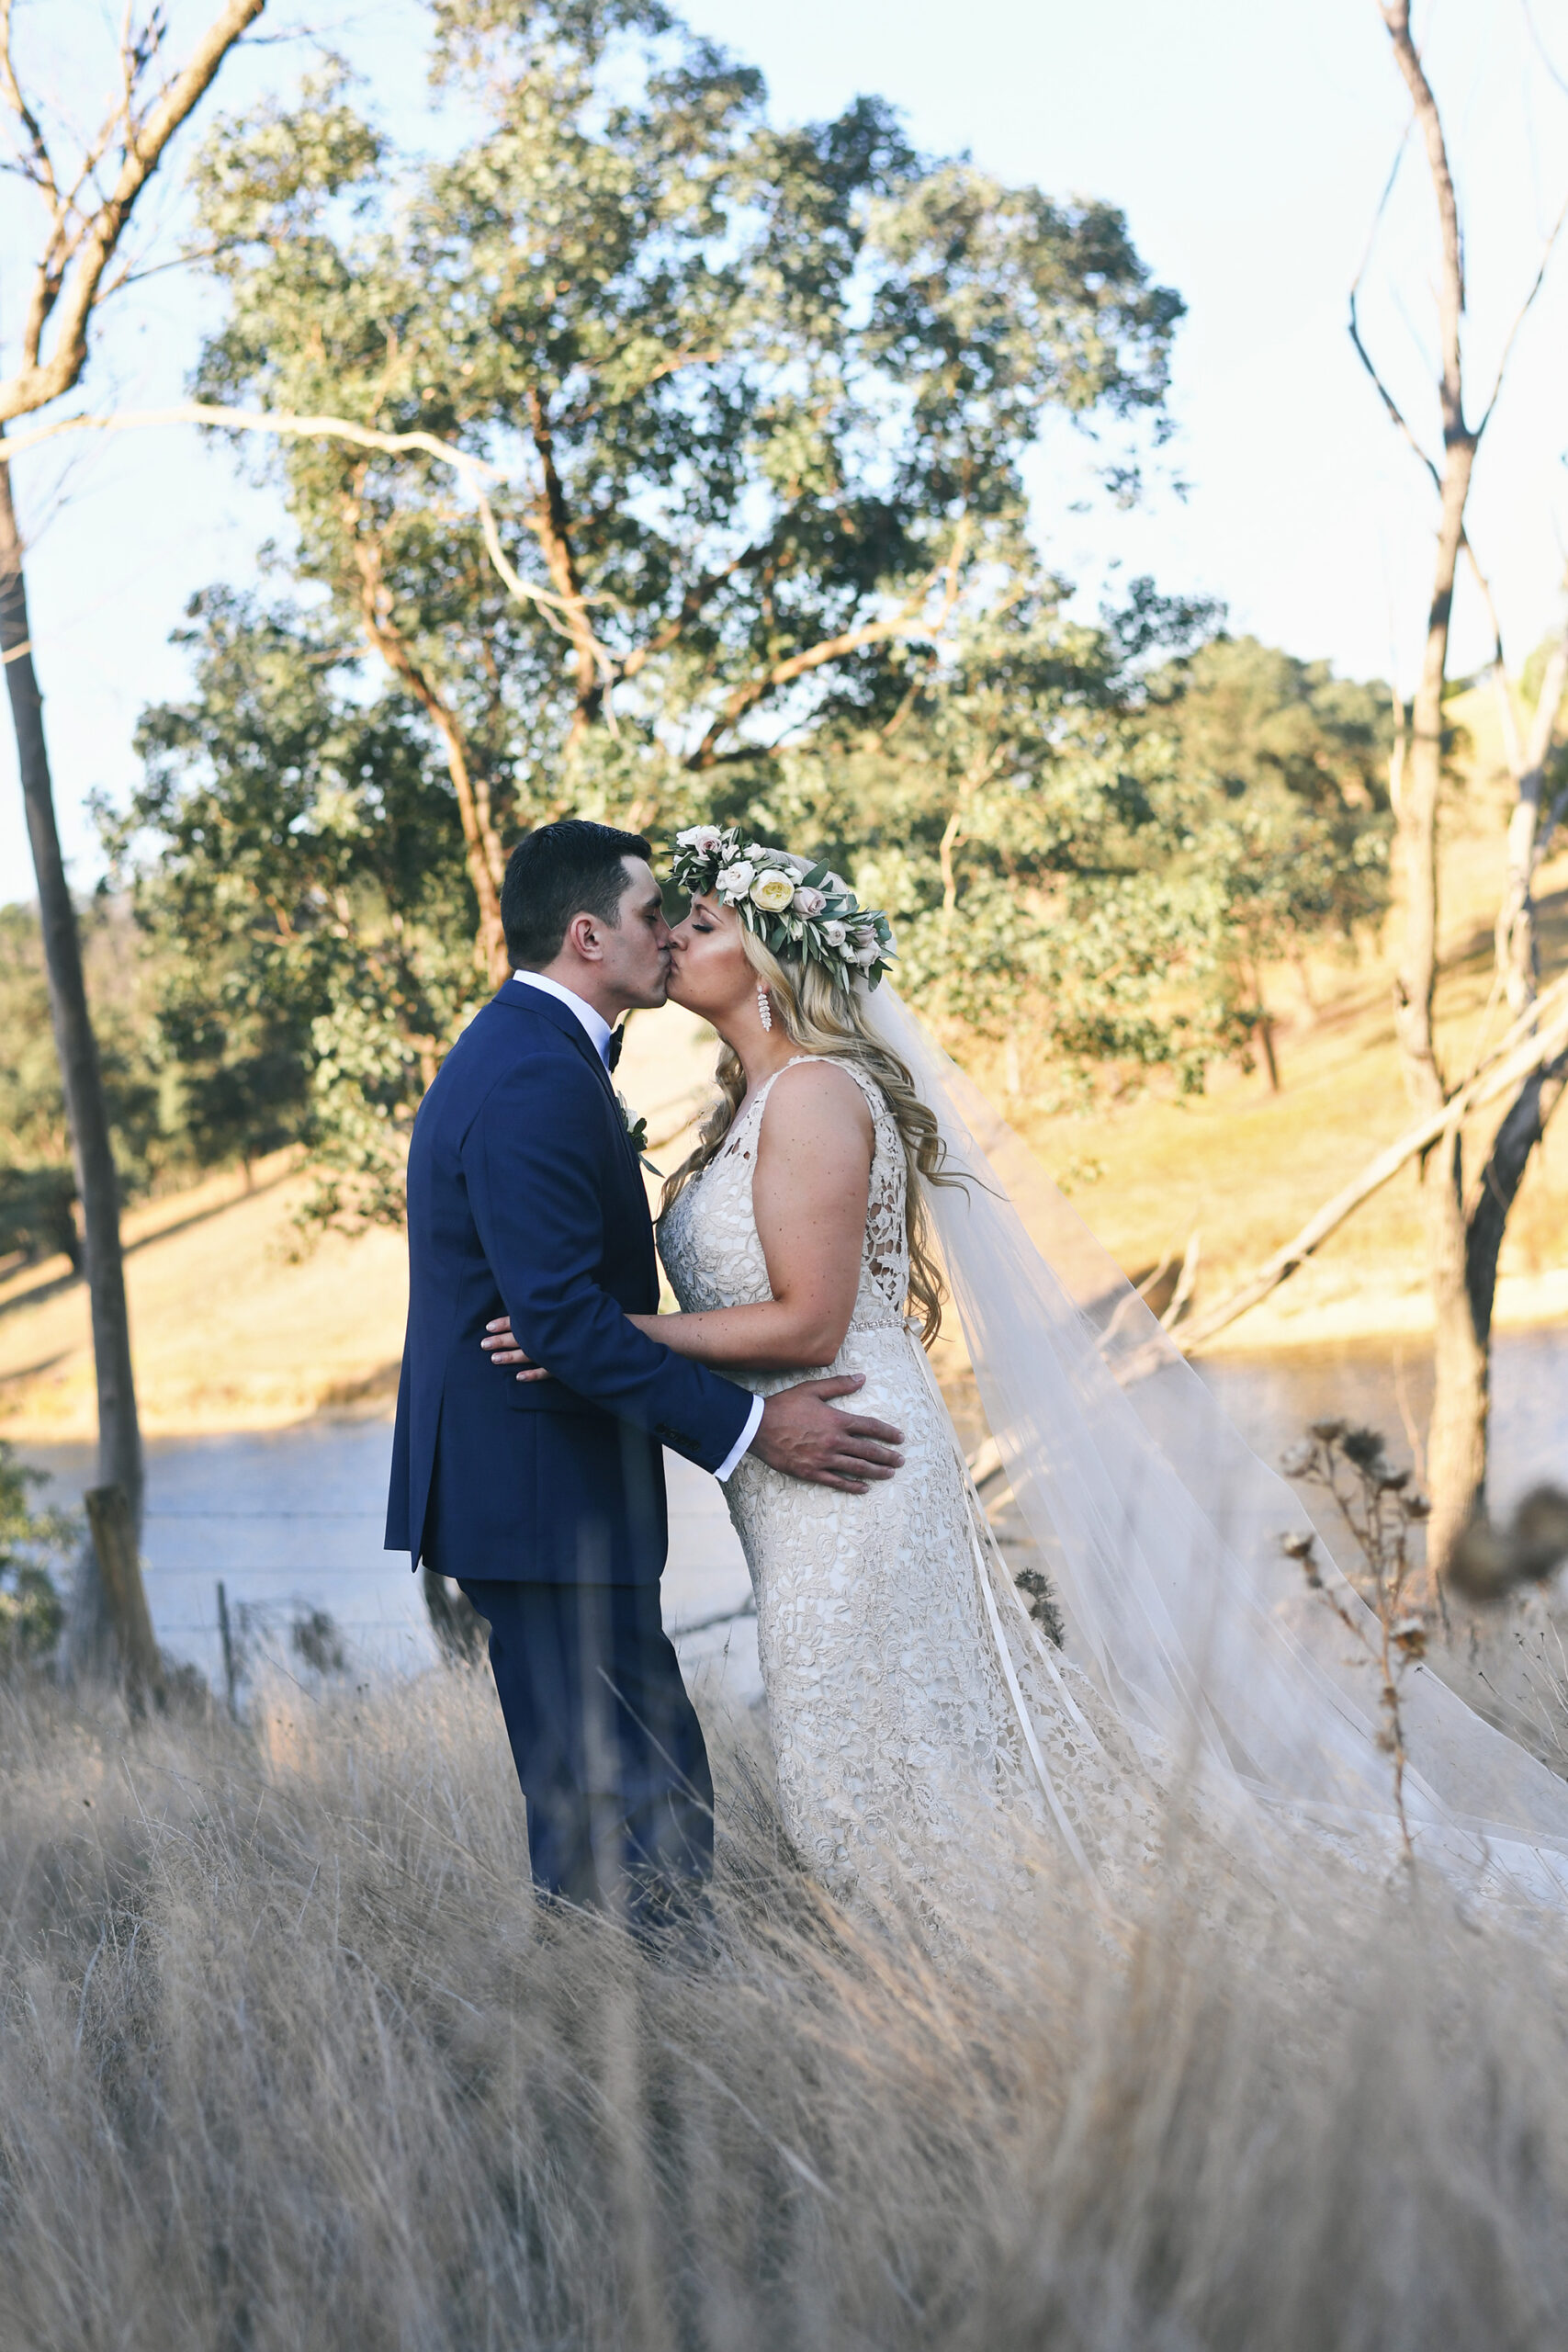 Laura Mark Country Rustic Wedding Tizia May Photography SBS 029 scaled